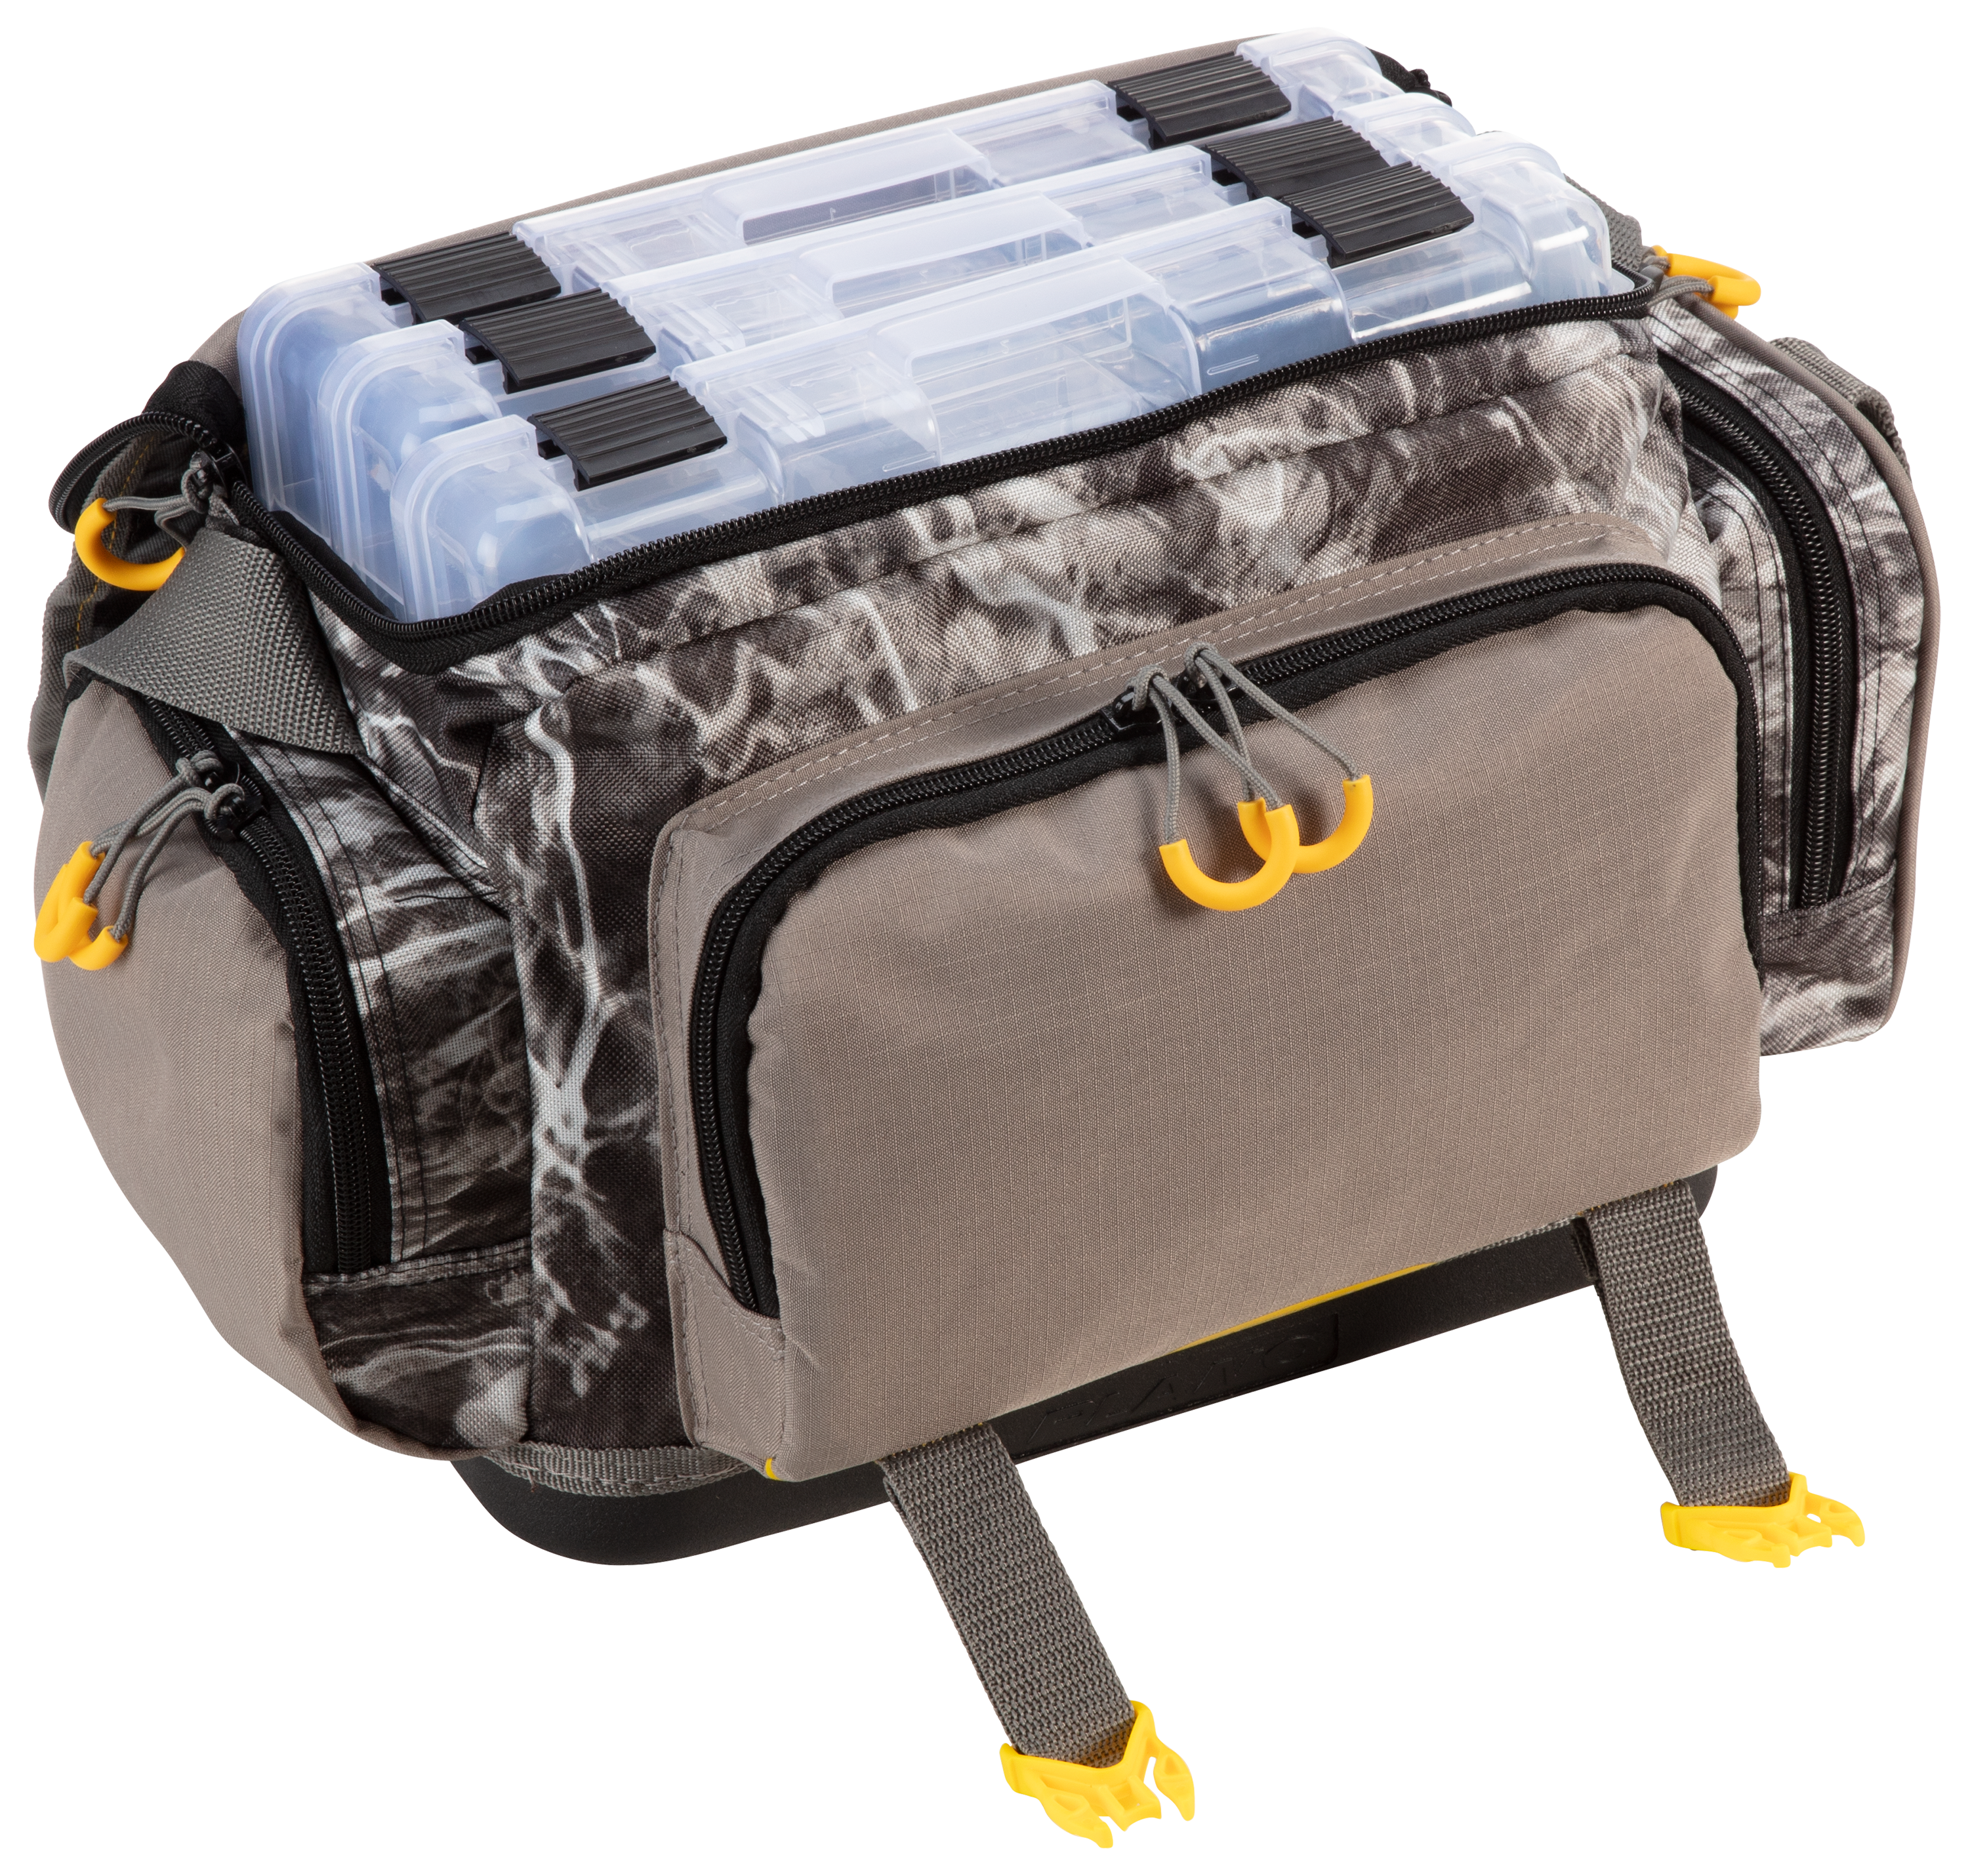 Plano Guide Series 3600 Tackle Bag, Medium, Beige 1680 Denier Fabric with  Waterproof Base, Includes 5 Stowaway Utility Boxes, Premium Fishing Storage  for Baits & Lures : : Sports, Fitness & Outdoors